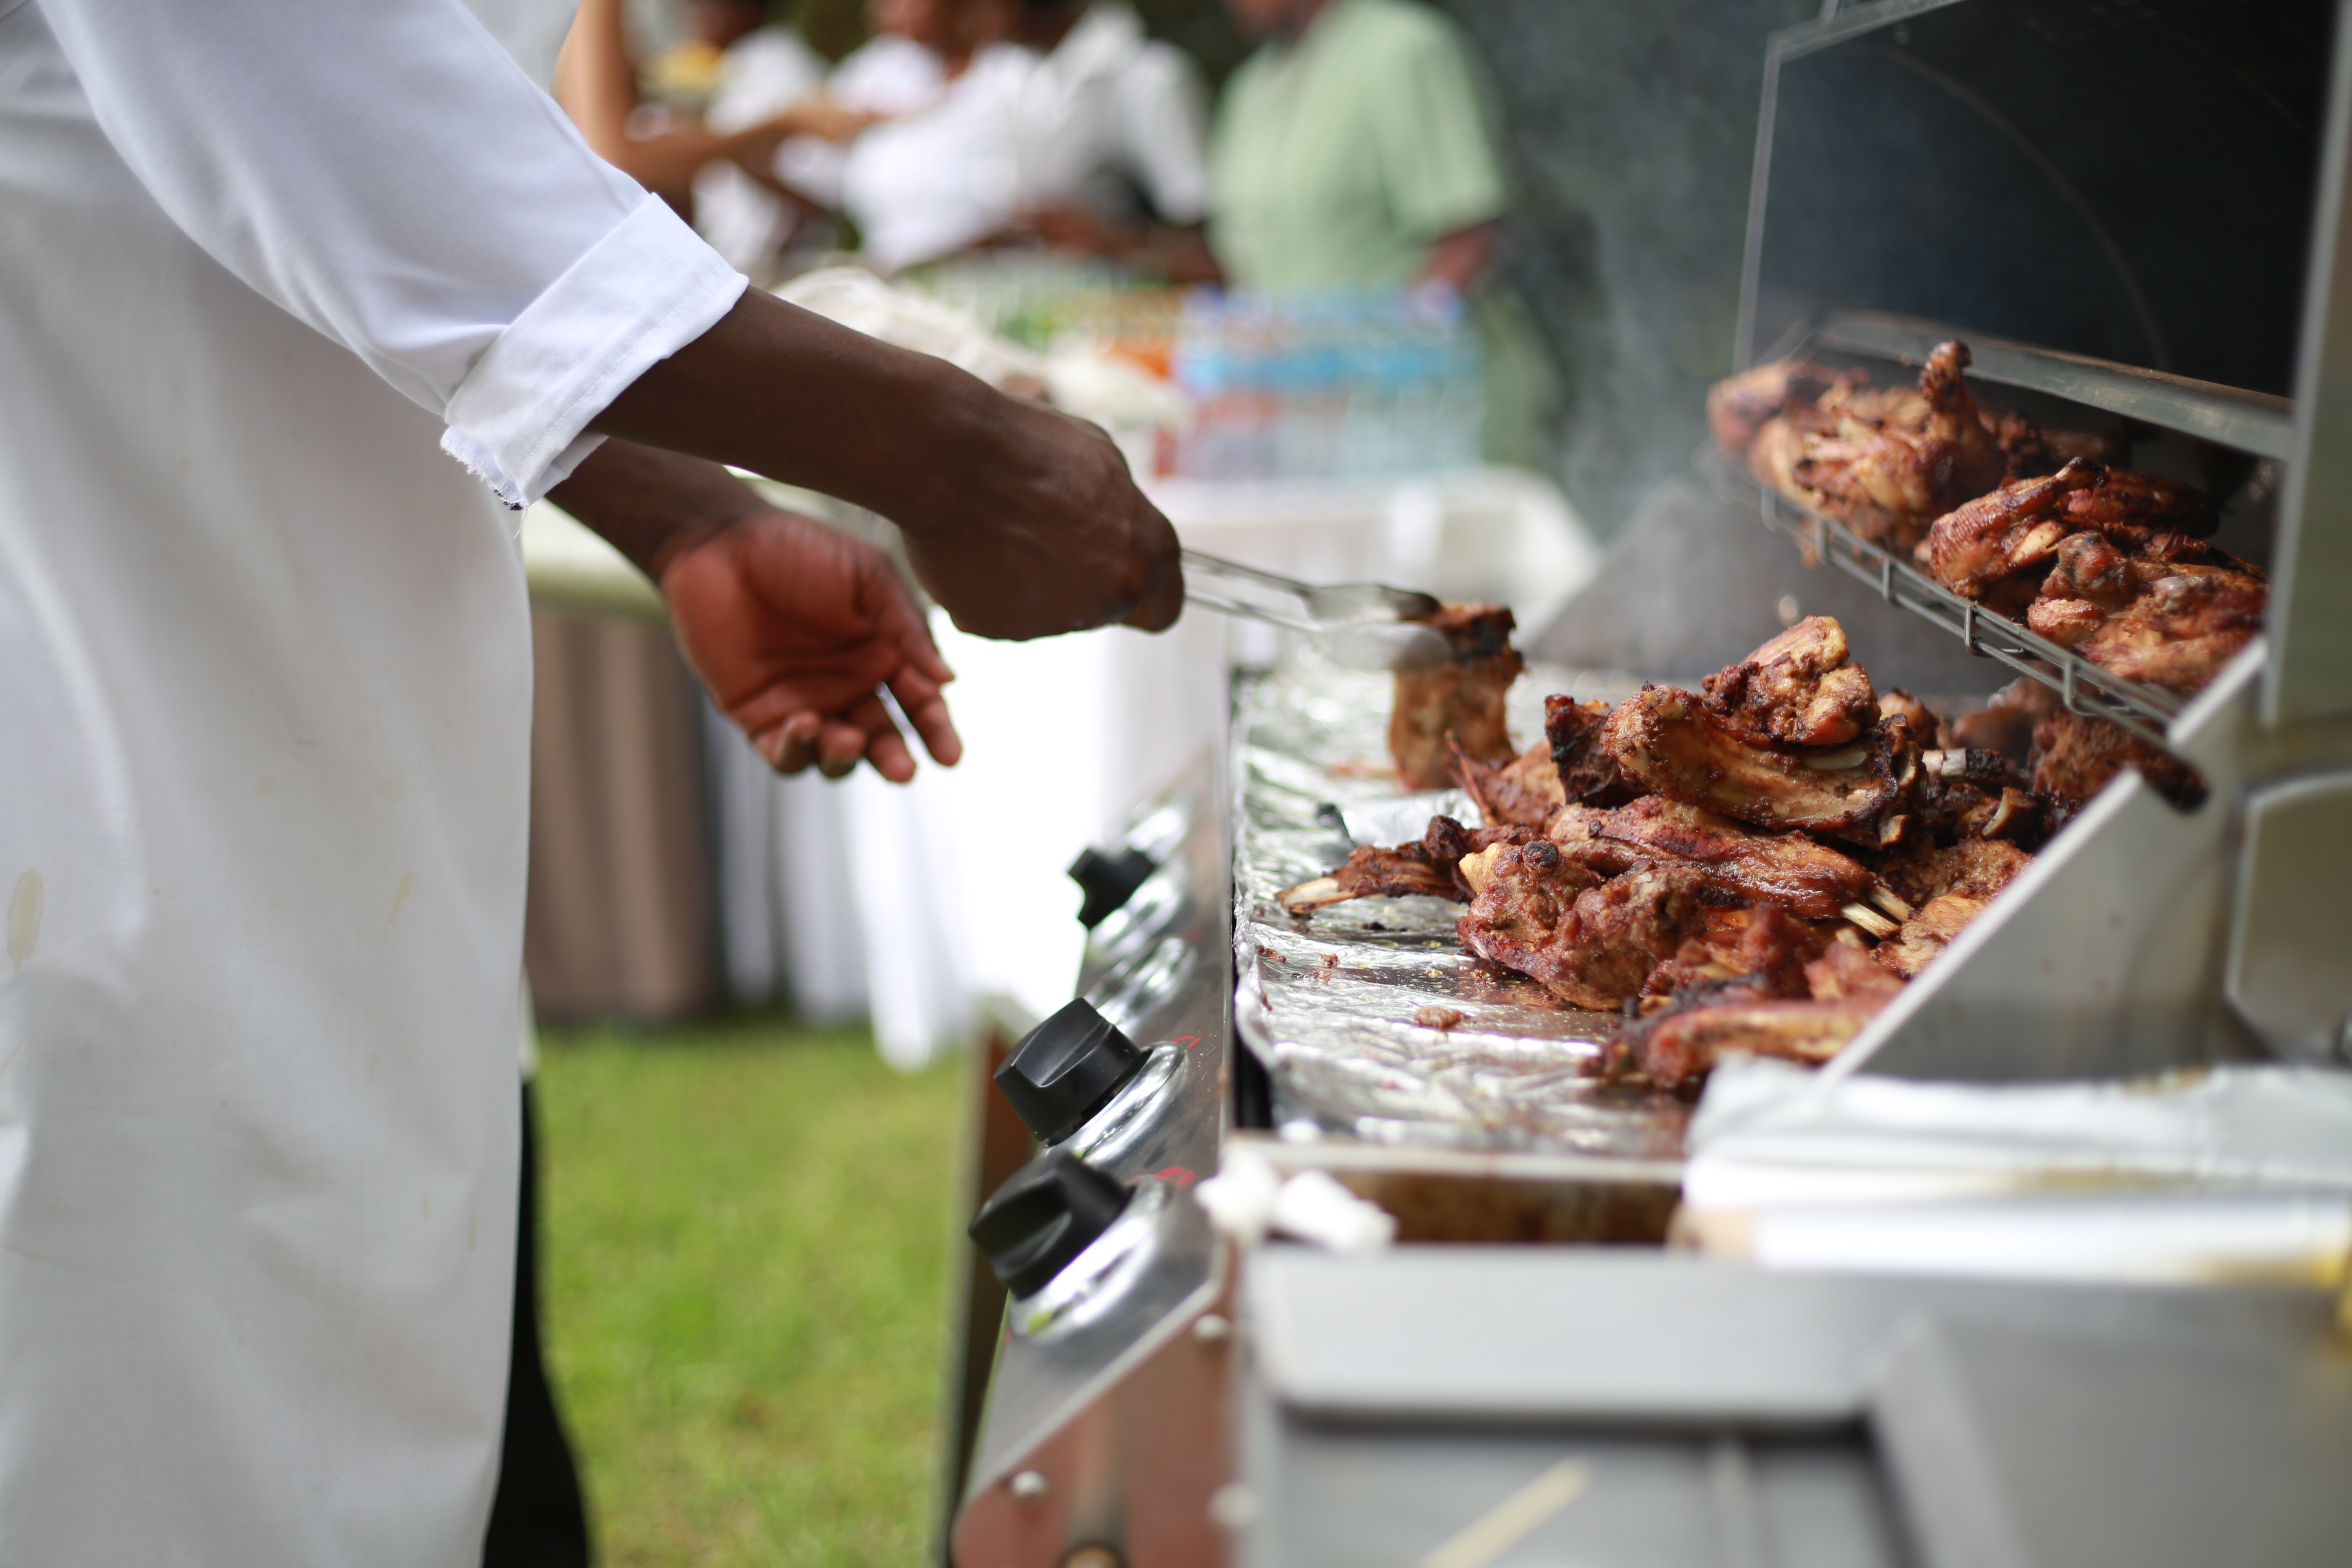 Image description: a black man flips grilled chicken on a stainless-steel grill on a summer day.